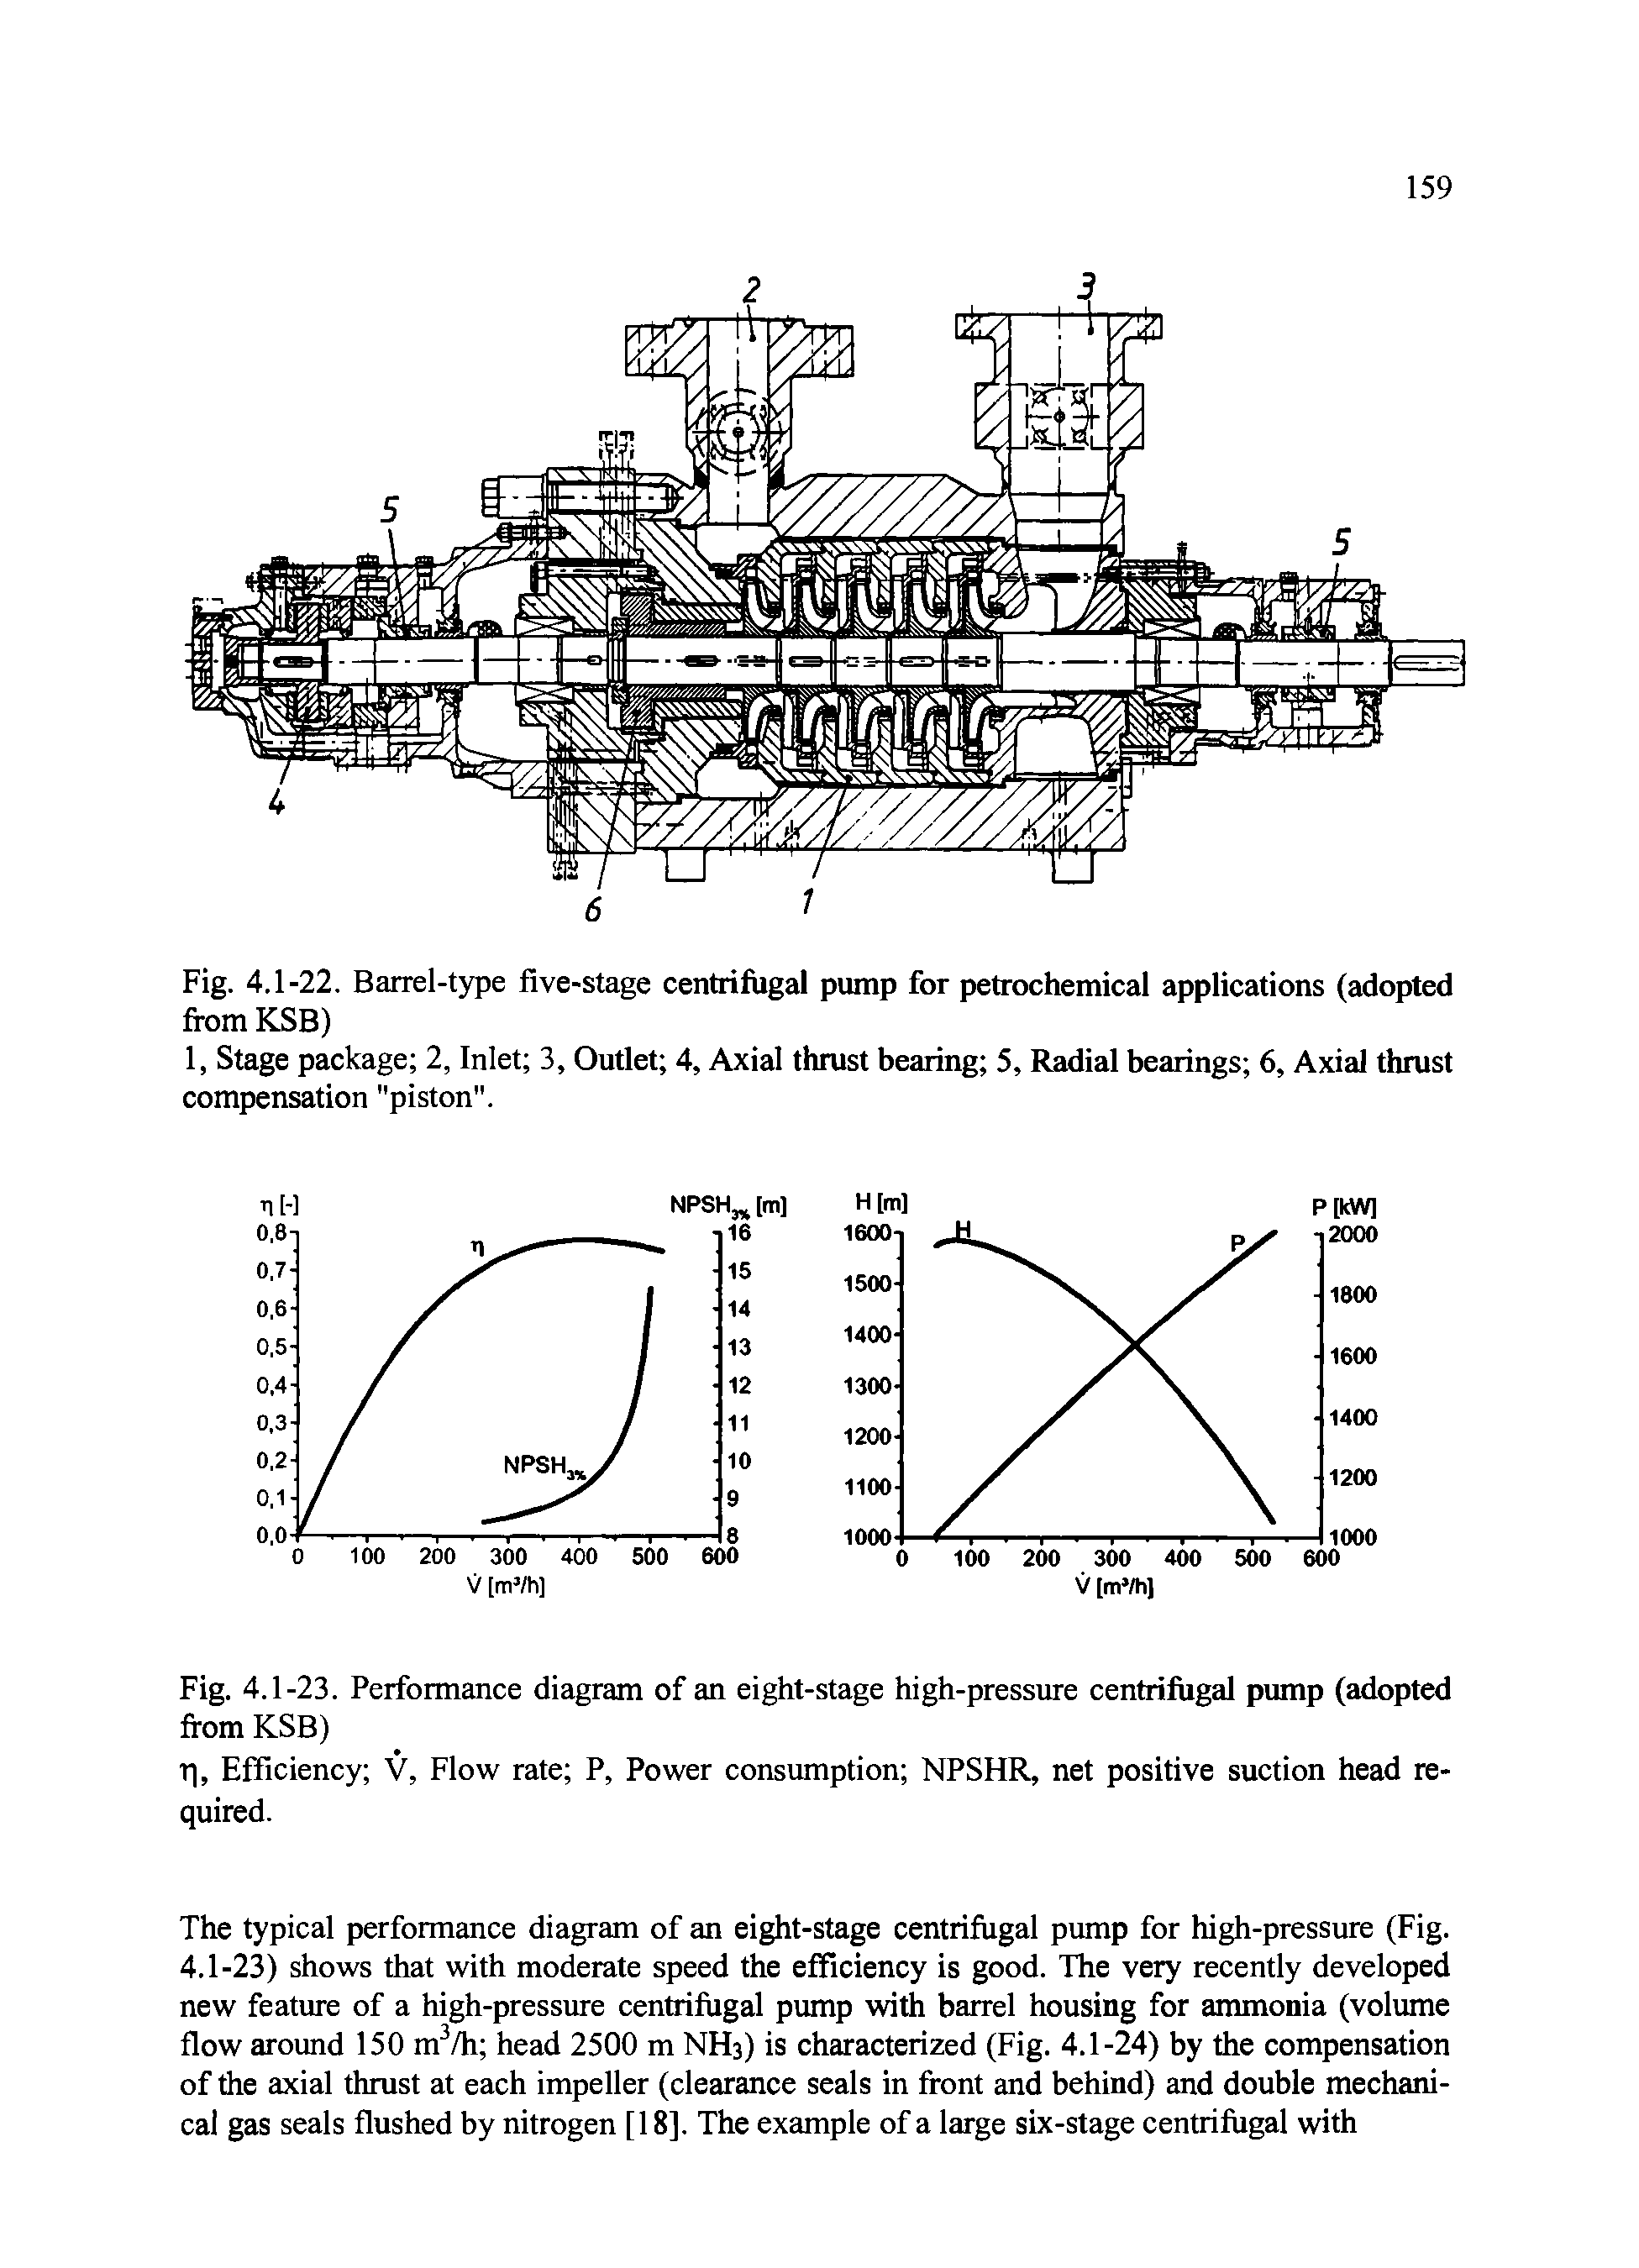 Fig. 4.1-23. Performance diagram of an eight-stage high-pressure centrifugal pump (adopted from KSB)...